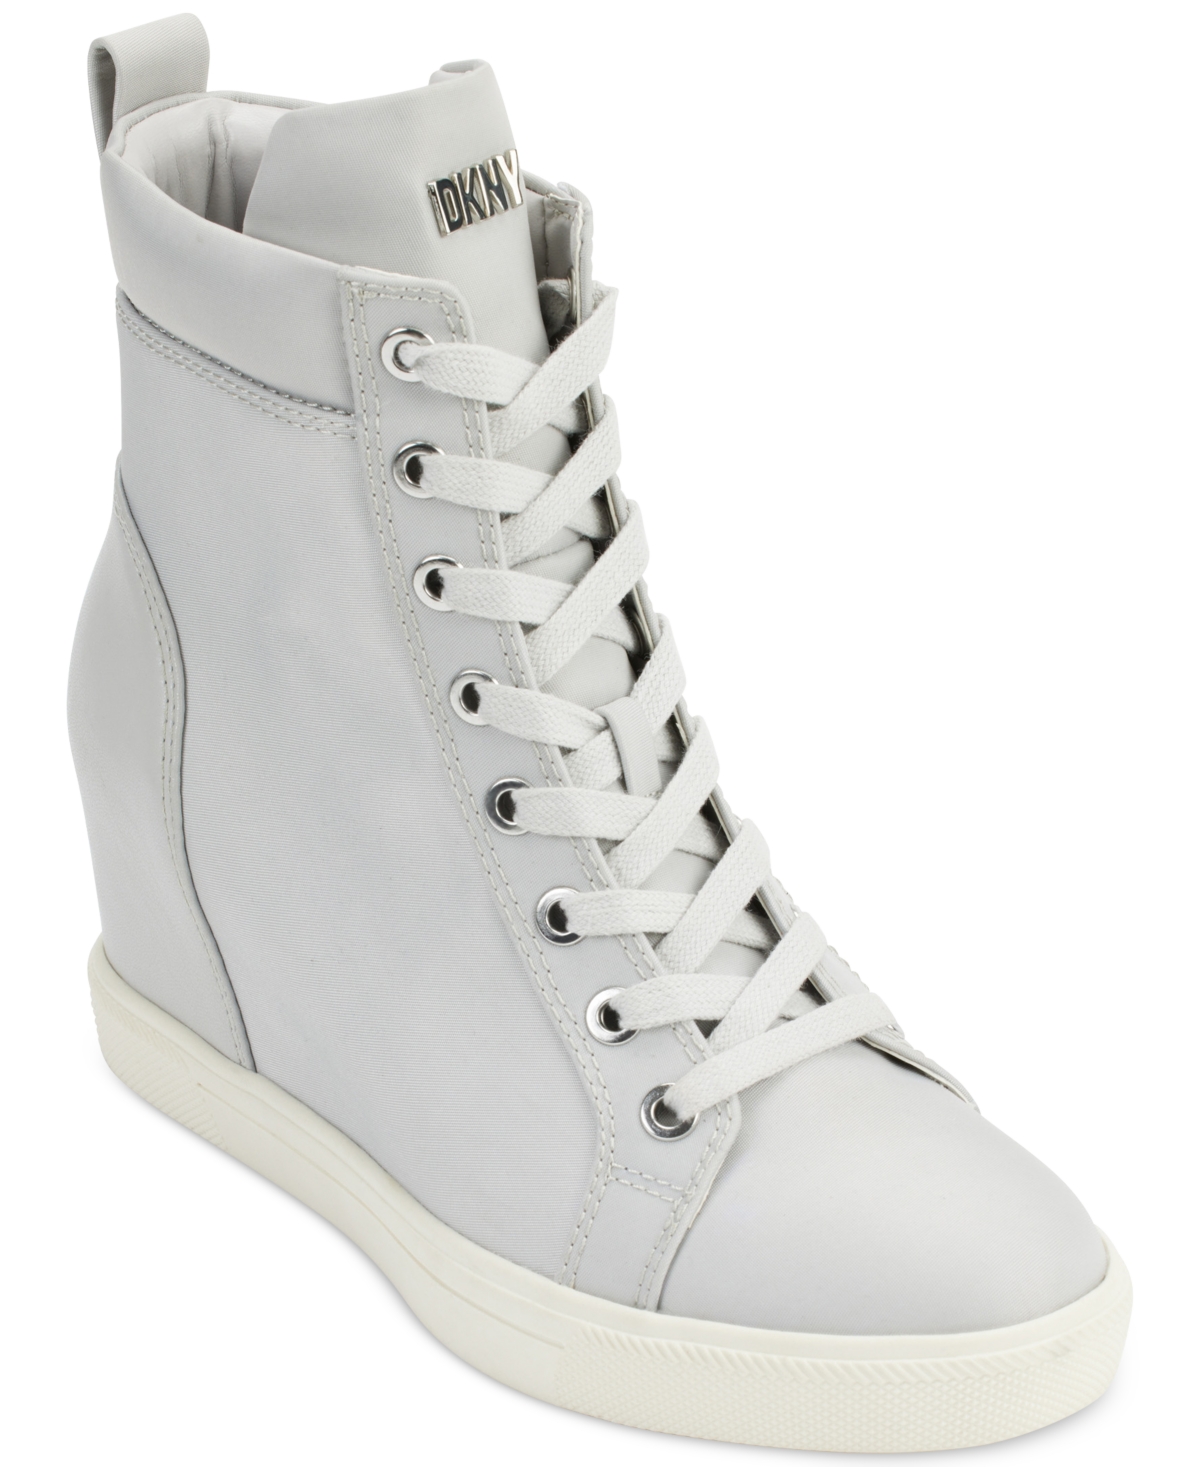 Dkny Women's Lace-Up High-Top Wedge Sneakers Smart Closet